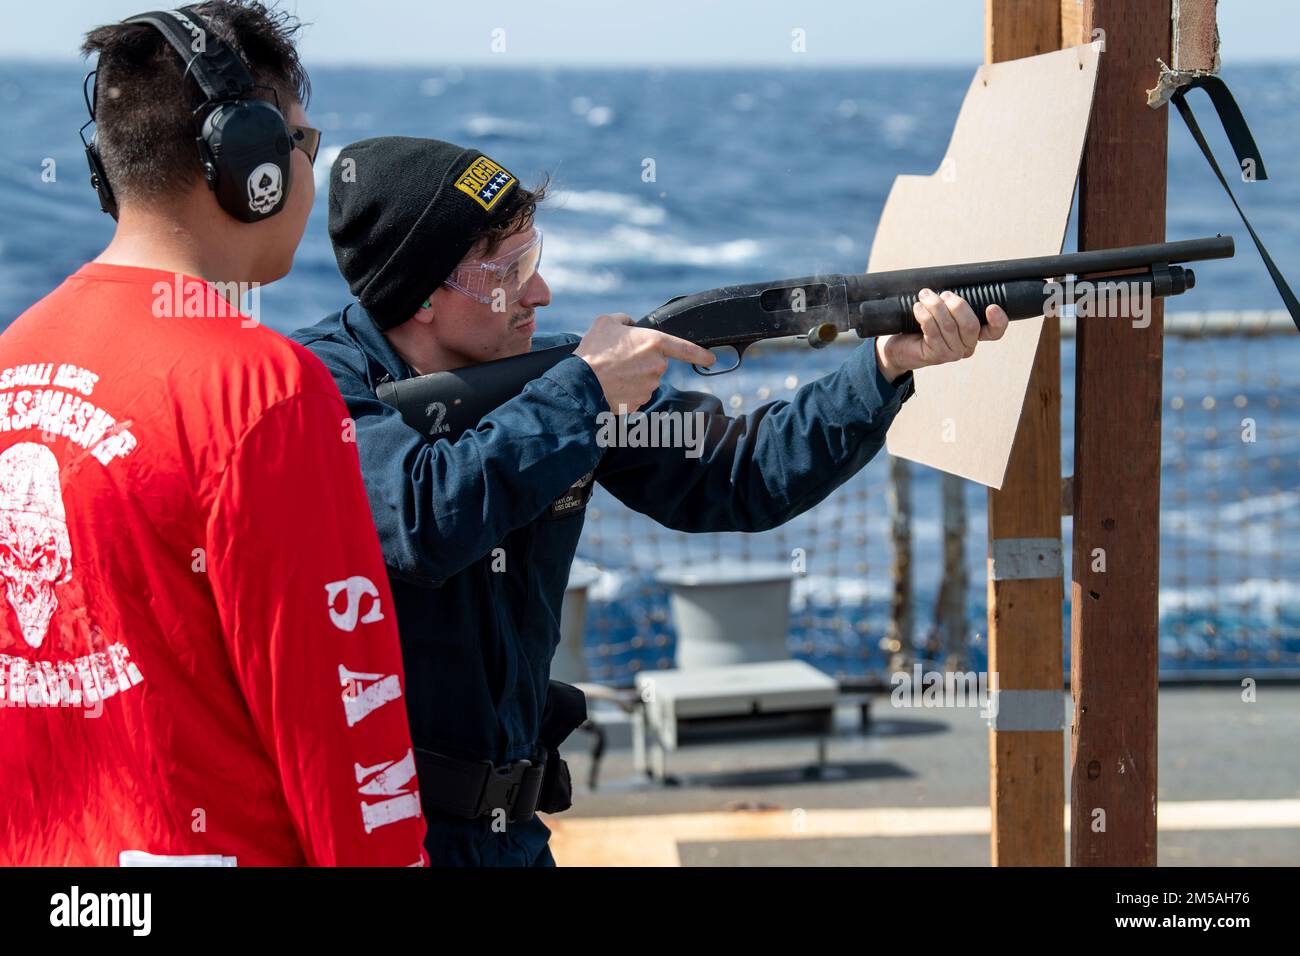 SOUTH CHINA SEA (Feb. 16, 2022) Gunner’s Mate 2nd Class Jeremy Gillentine, left, from Abilene, Texas, acts as Range Safety Officer while Sonar Technician (Surface) 2nd Class Taylor Clark, from Arlington, Texas, fires the M500 shotgun during a qualification course aboard the Arleigh Burke-class guided-missile destroyer USS Dewey (DDG 105). Dewey is assigned to Destroyer Squadron (DESRON) 15 and is underway supporting a free and open Indo-Pacific. CTF 71/DESRON 15 is the Navy’s largest forward-deployed DESRON and the U.S. 7th Fleet’s principal surface force. Stock Photo